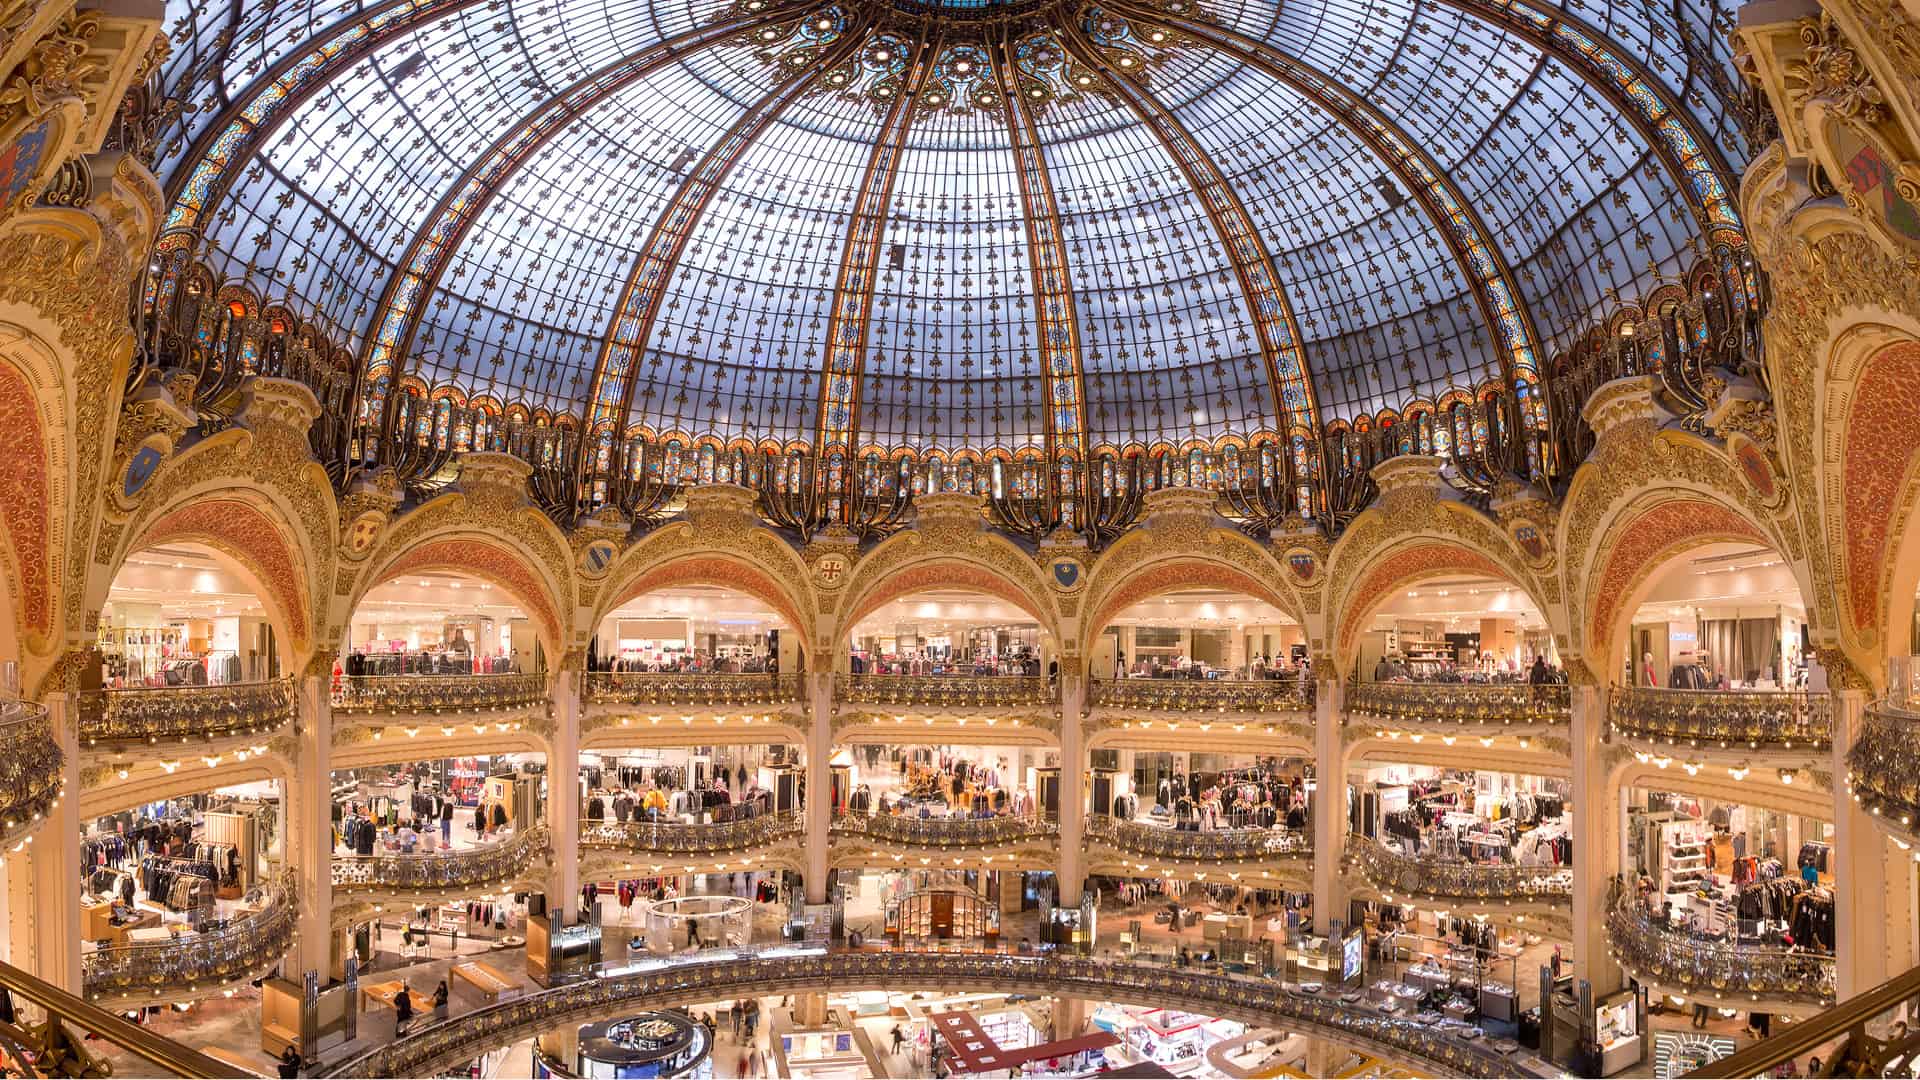 The 30 Best High-End Department Stores in 2021